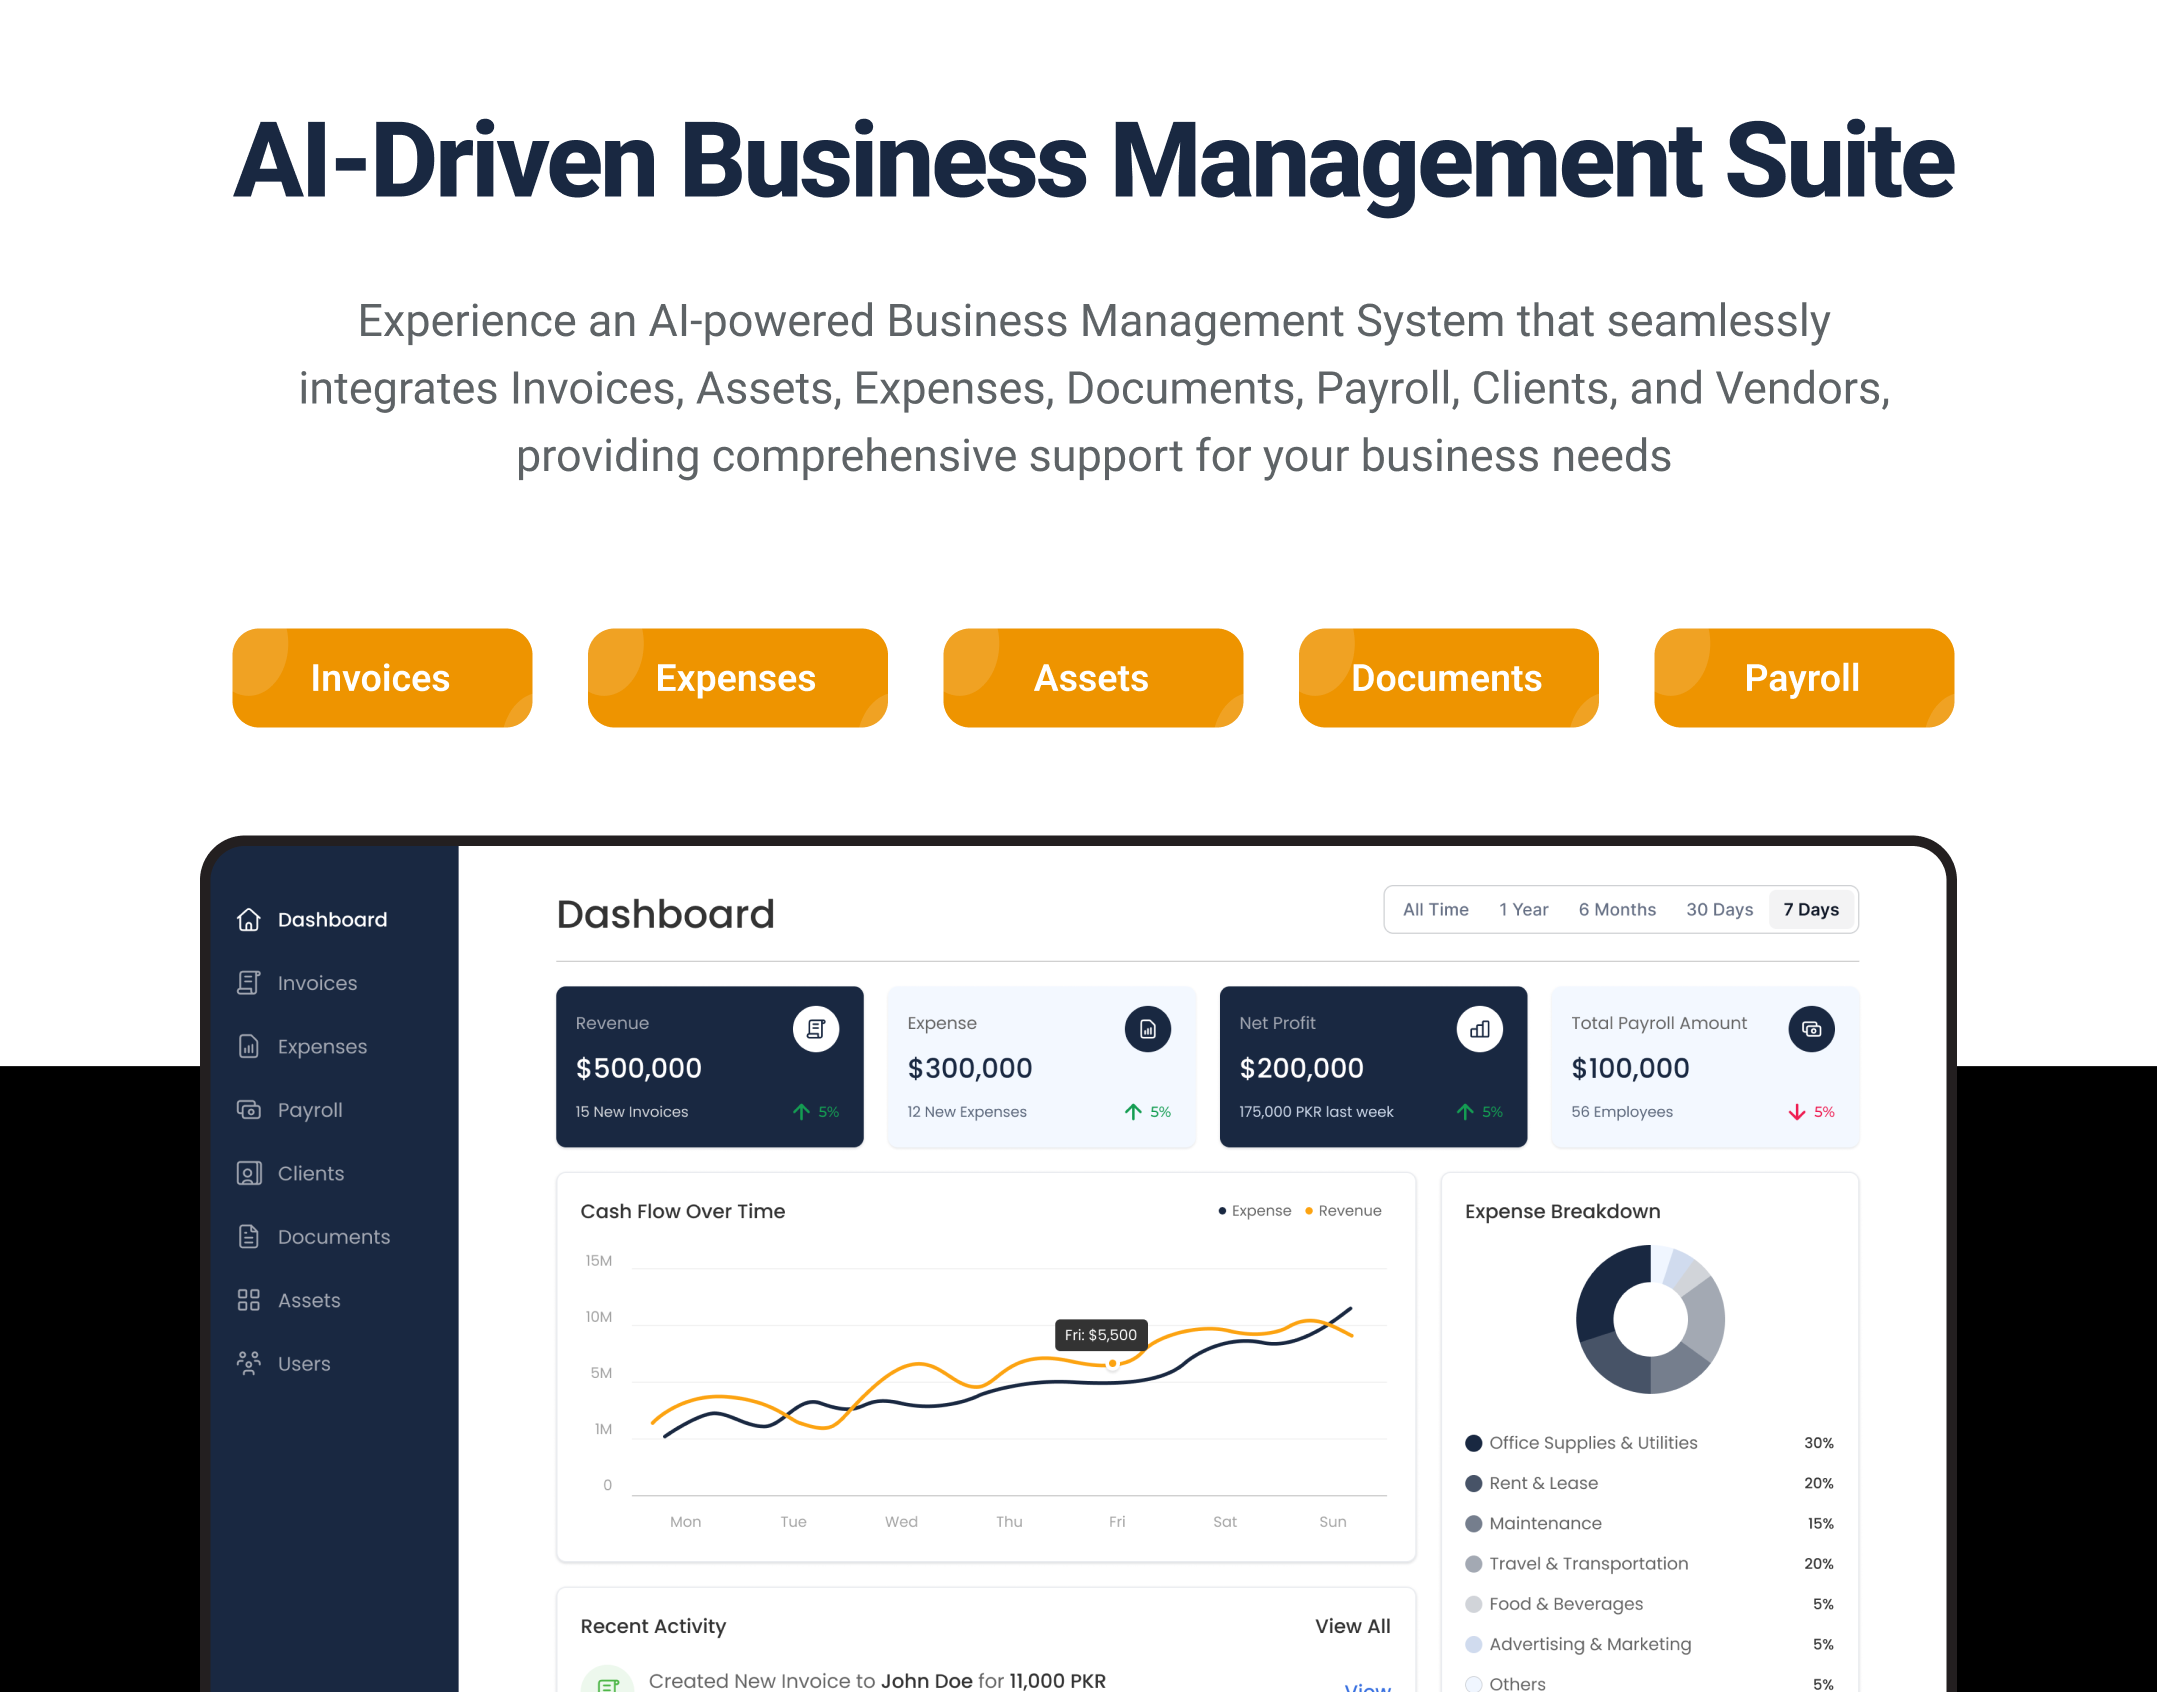 AI-Powered Invoices, Expenses, Assets, Documents, Payroll & Clients Management System | AI Bot - 2